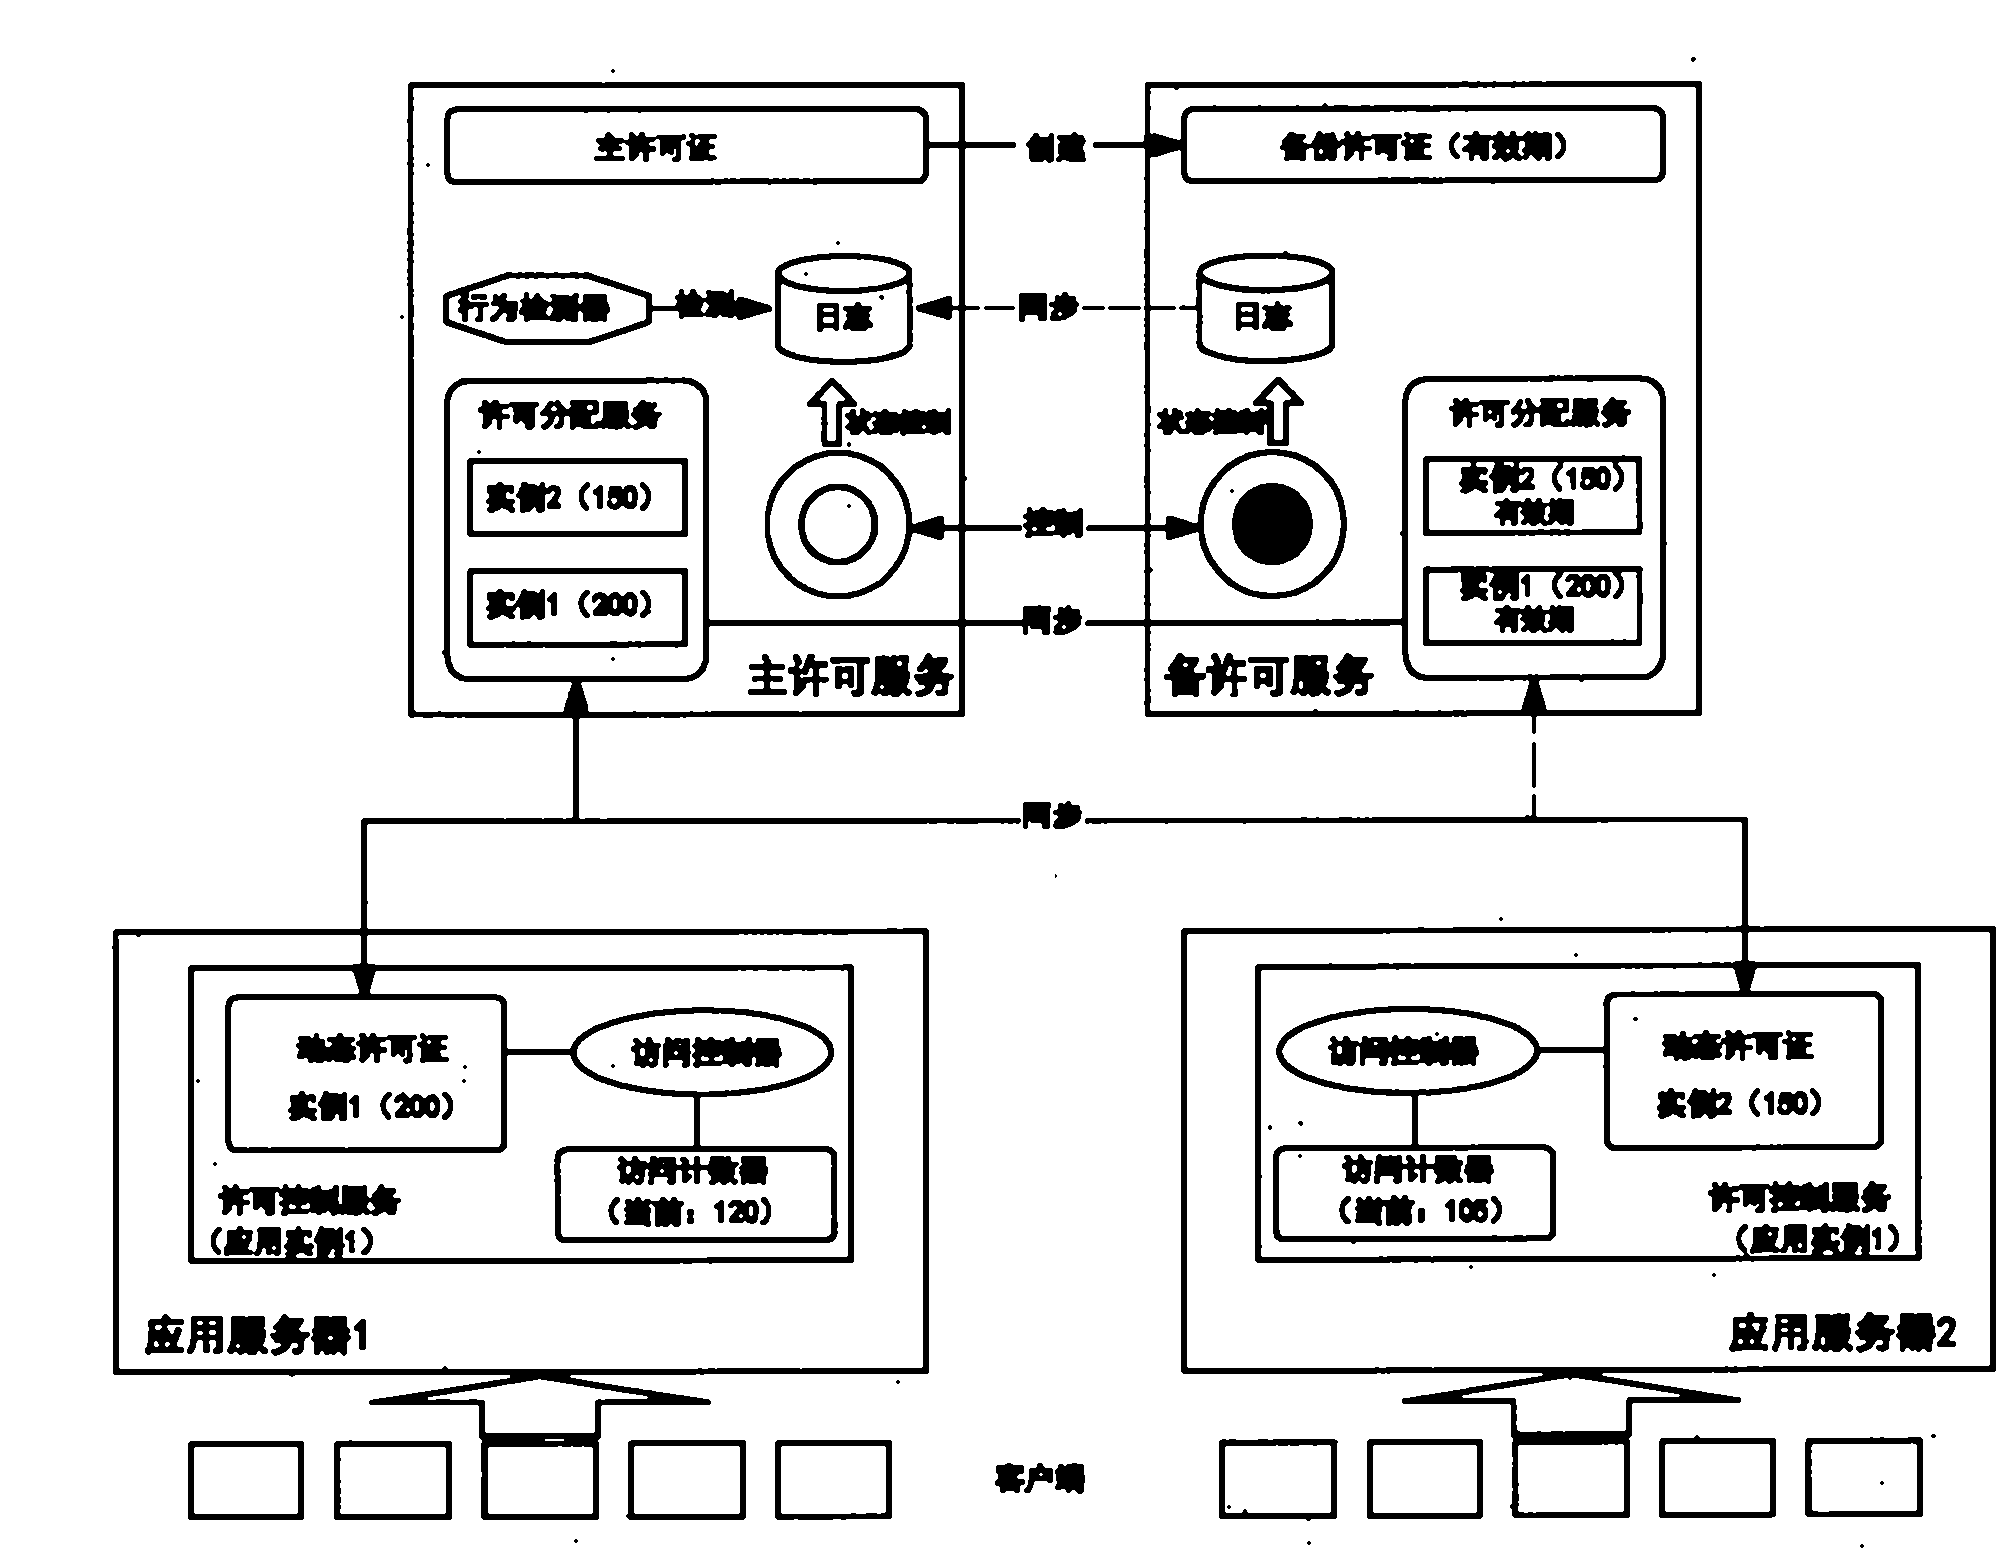 High-availability service terminal license control mode based on dynamic allocation and behavior analysis